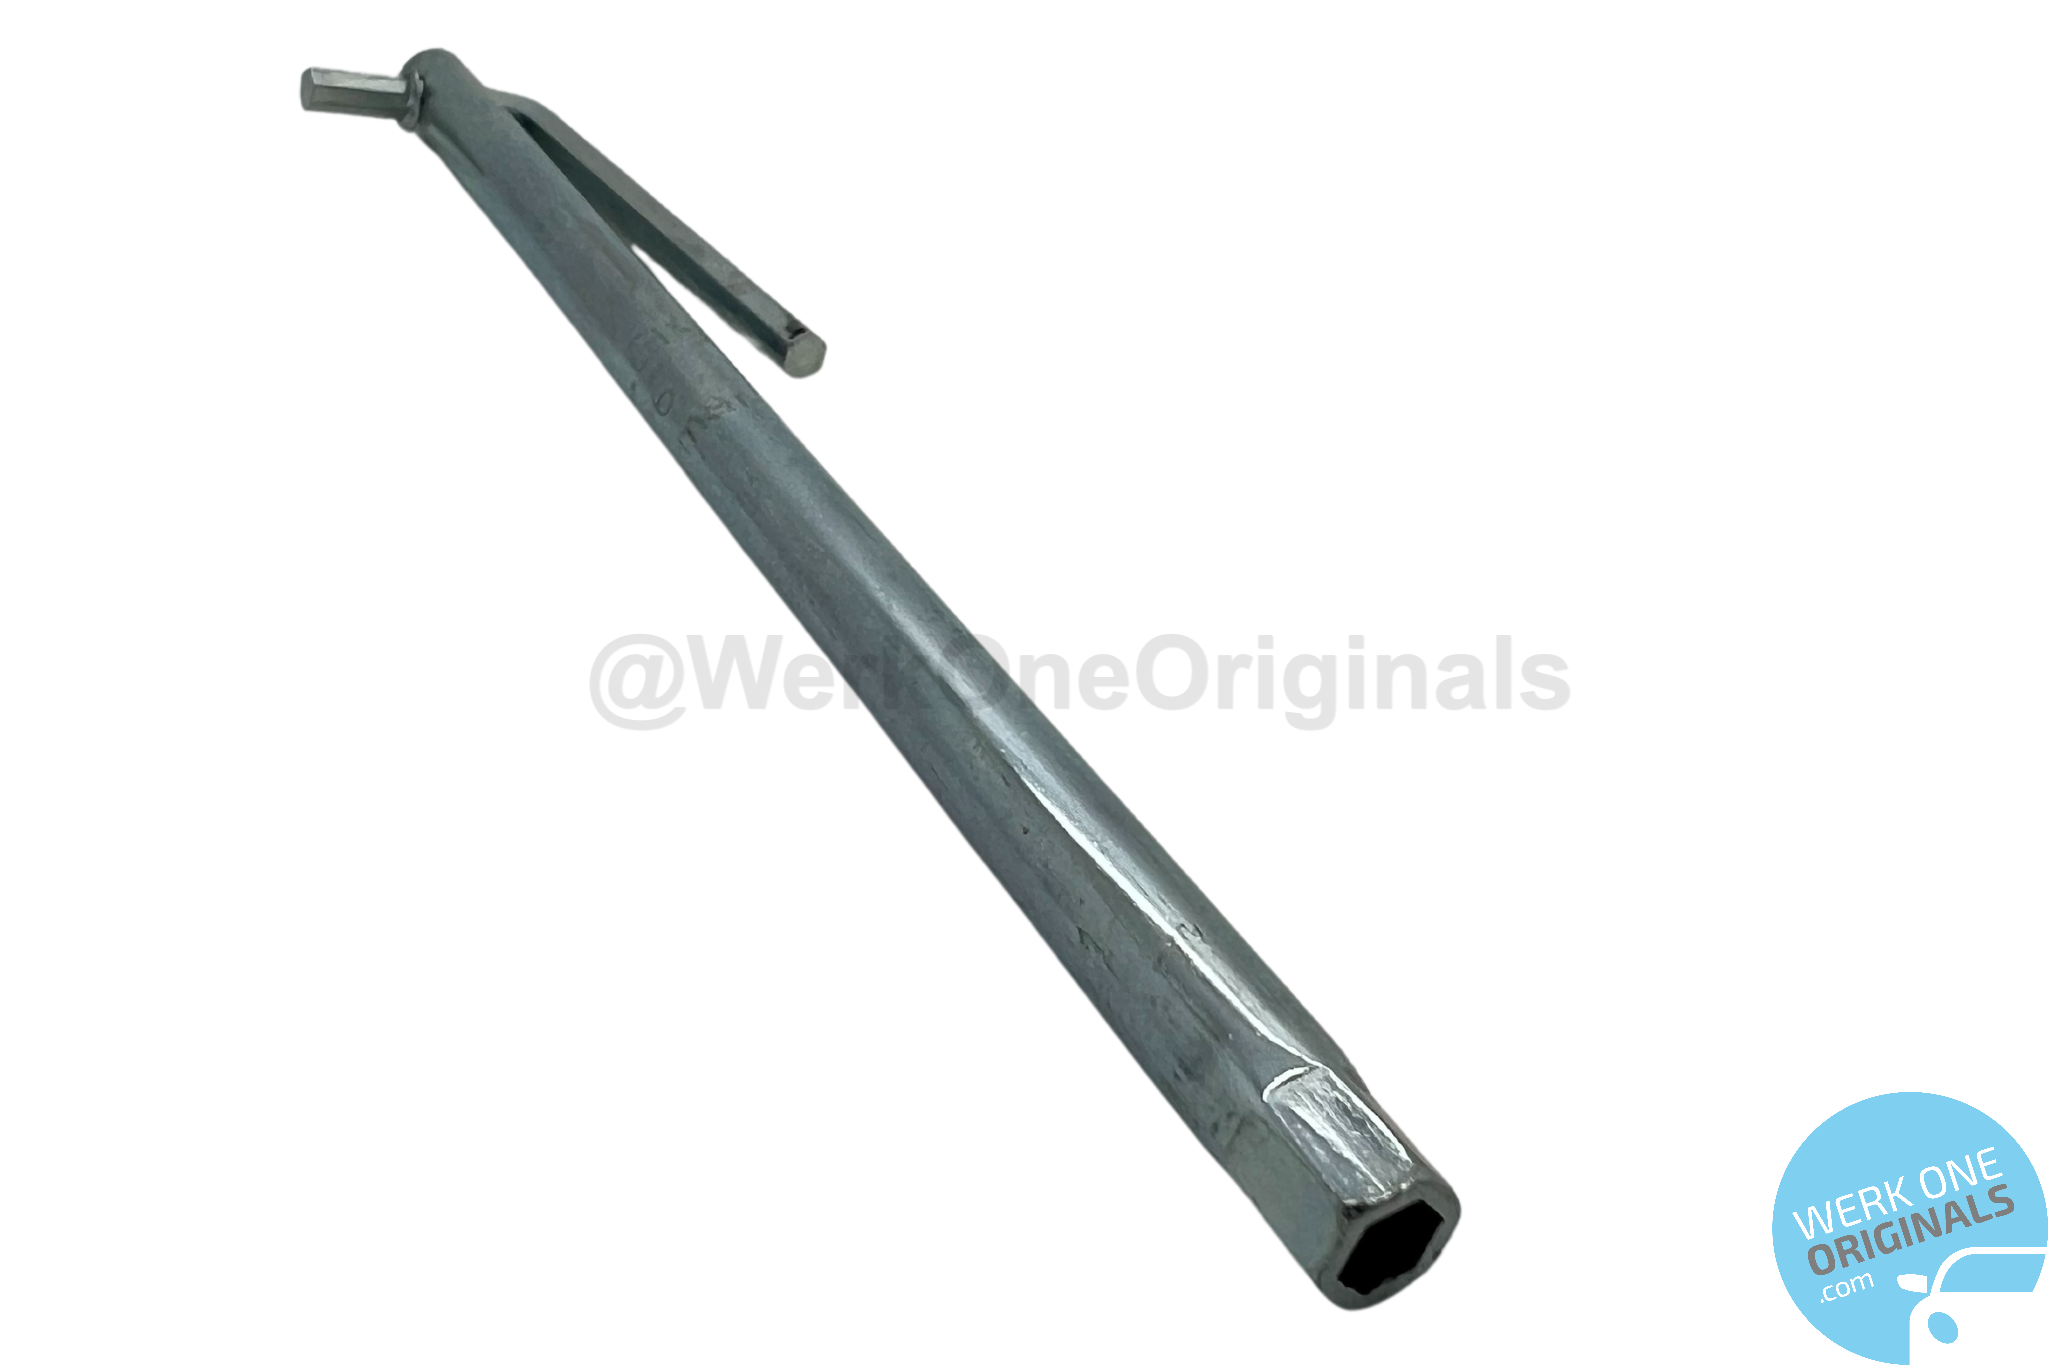 Official Porsche Headlight Removal Tool for Cayenne Type 955 & 957 Models